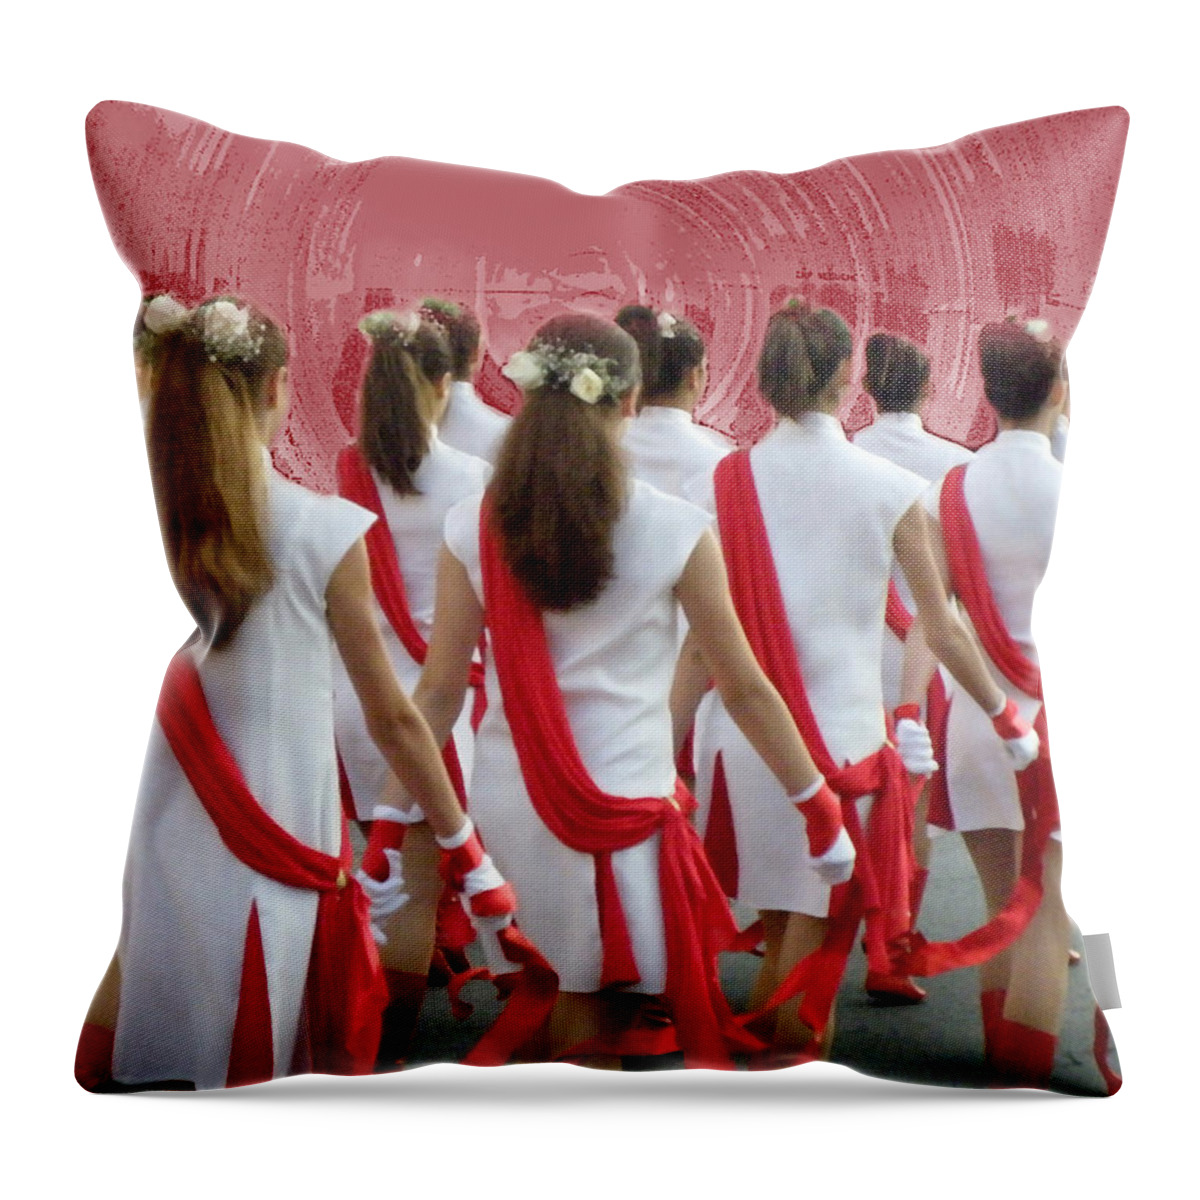 Augusta Stylianou Throw Pillow featuring the photograph Beautiful Girls in Parade by Augusta Stylianou